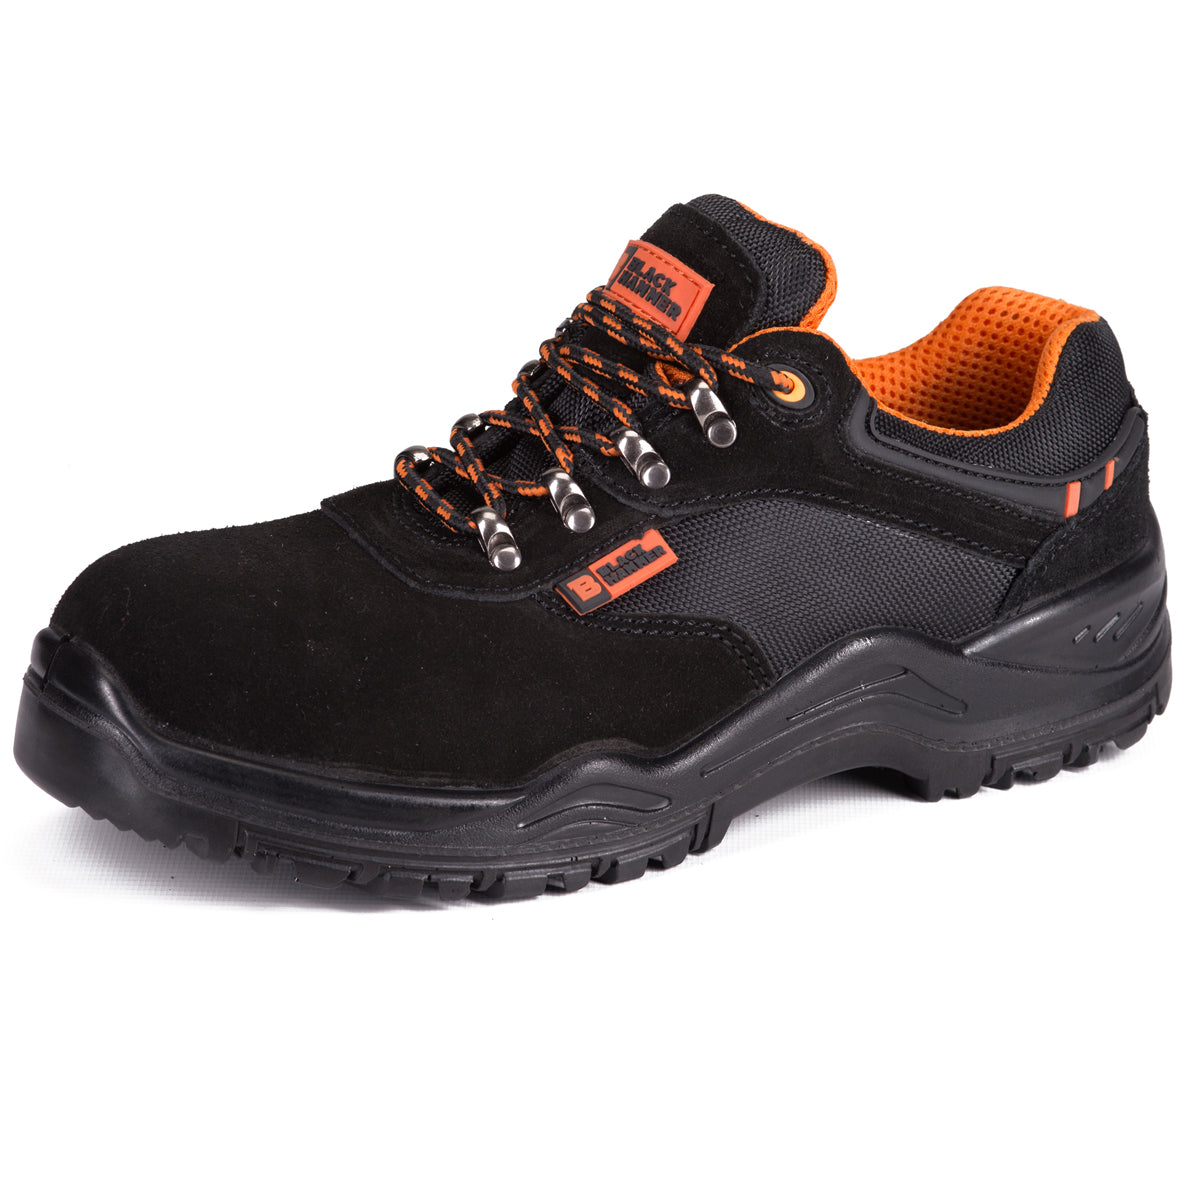 Lightweight Safety Shoes | Composite Safety Trainers with Kevlar midsole 1557 - Black Hammer